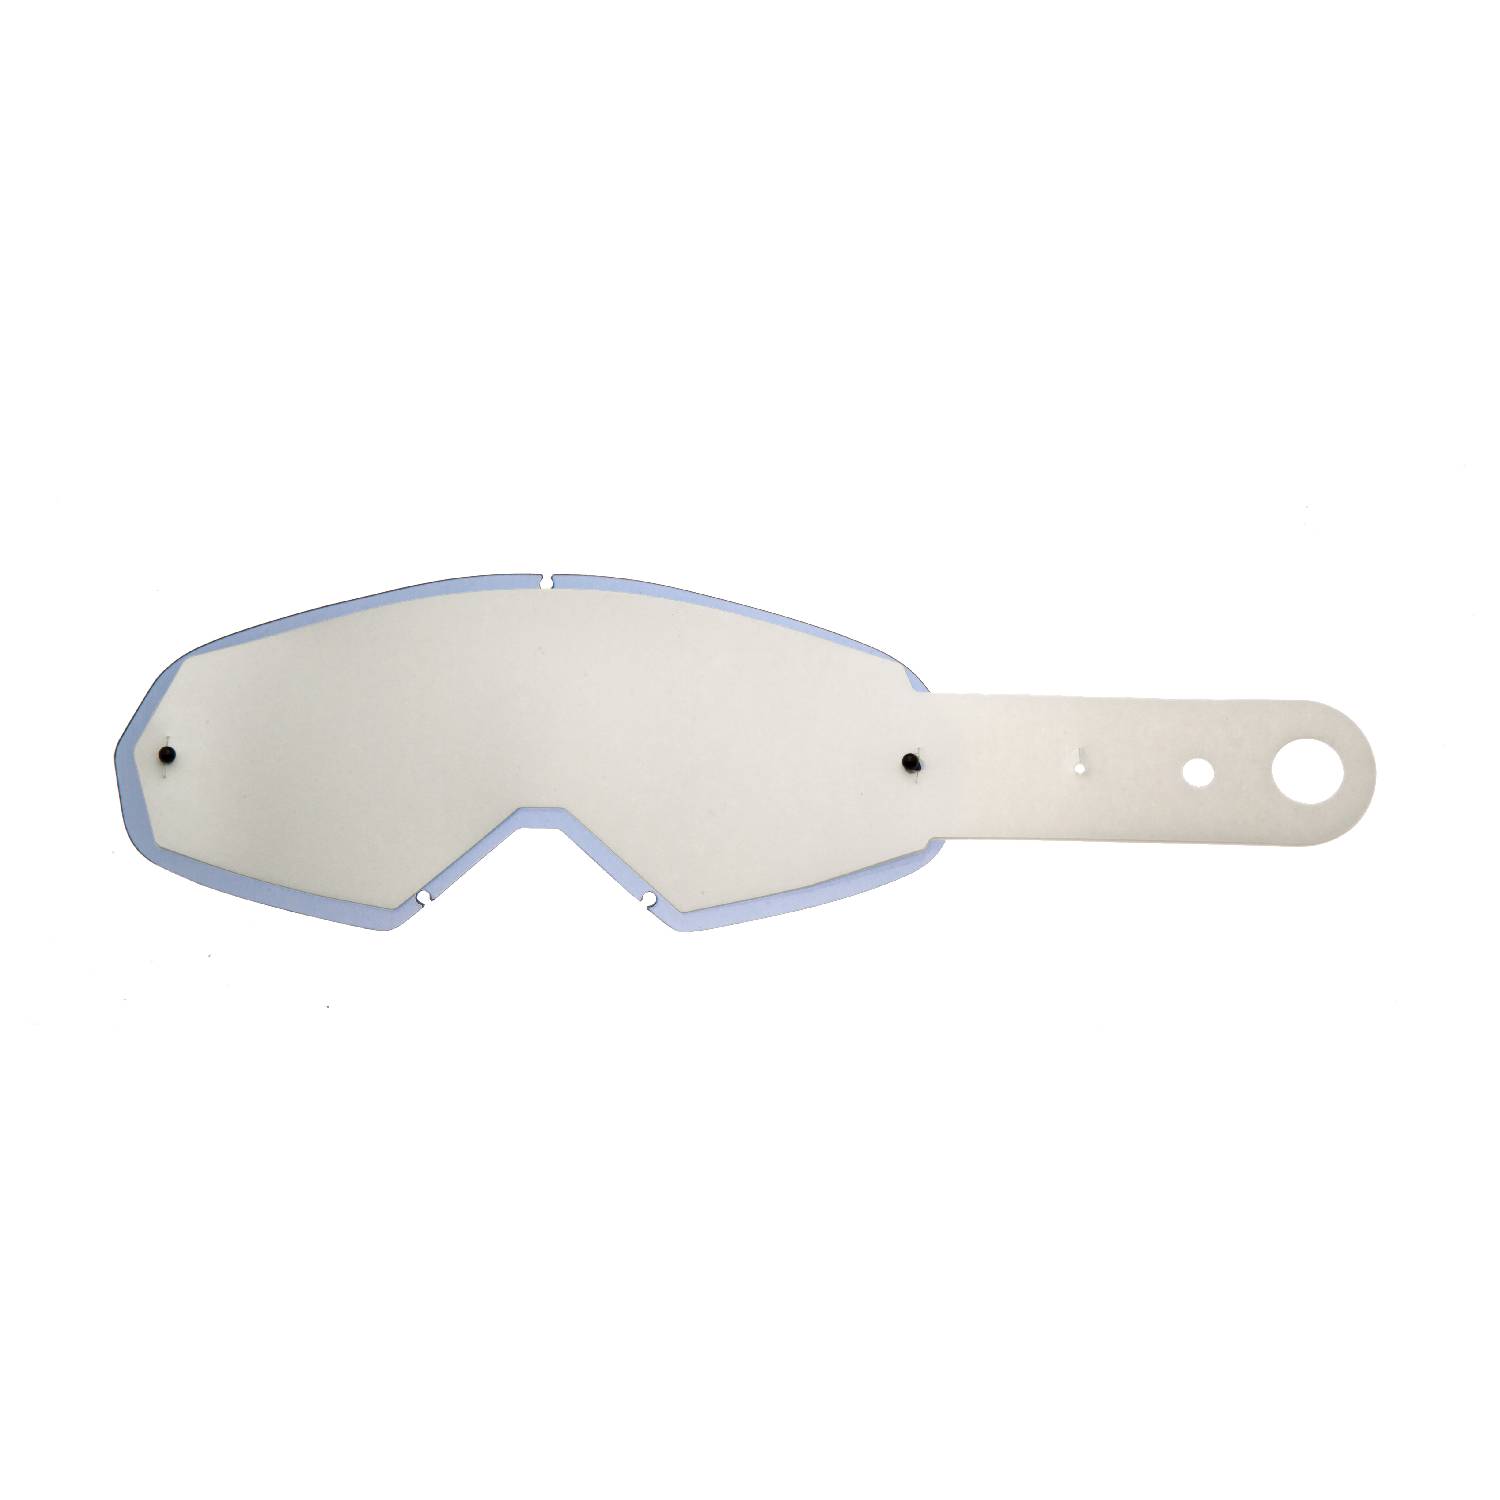 combo lenses with smokey lenses with 10 tear off compatible for Oakley Mayhem goggle